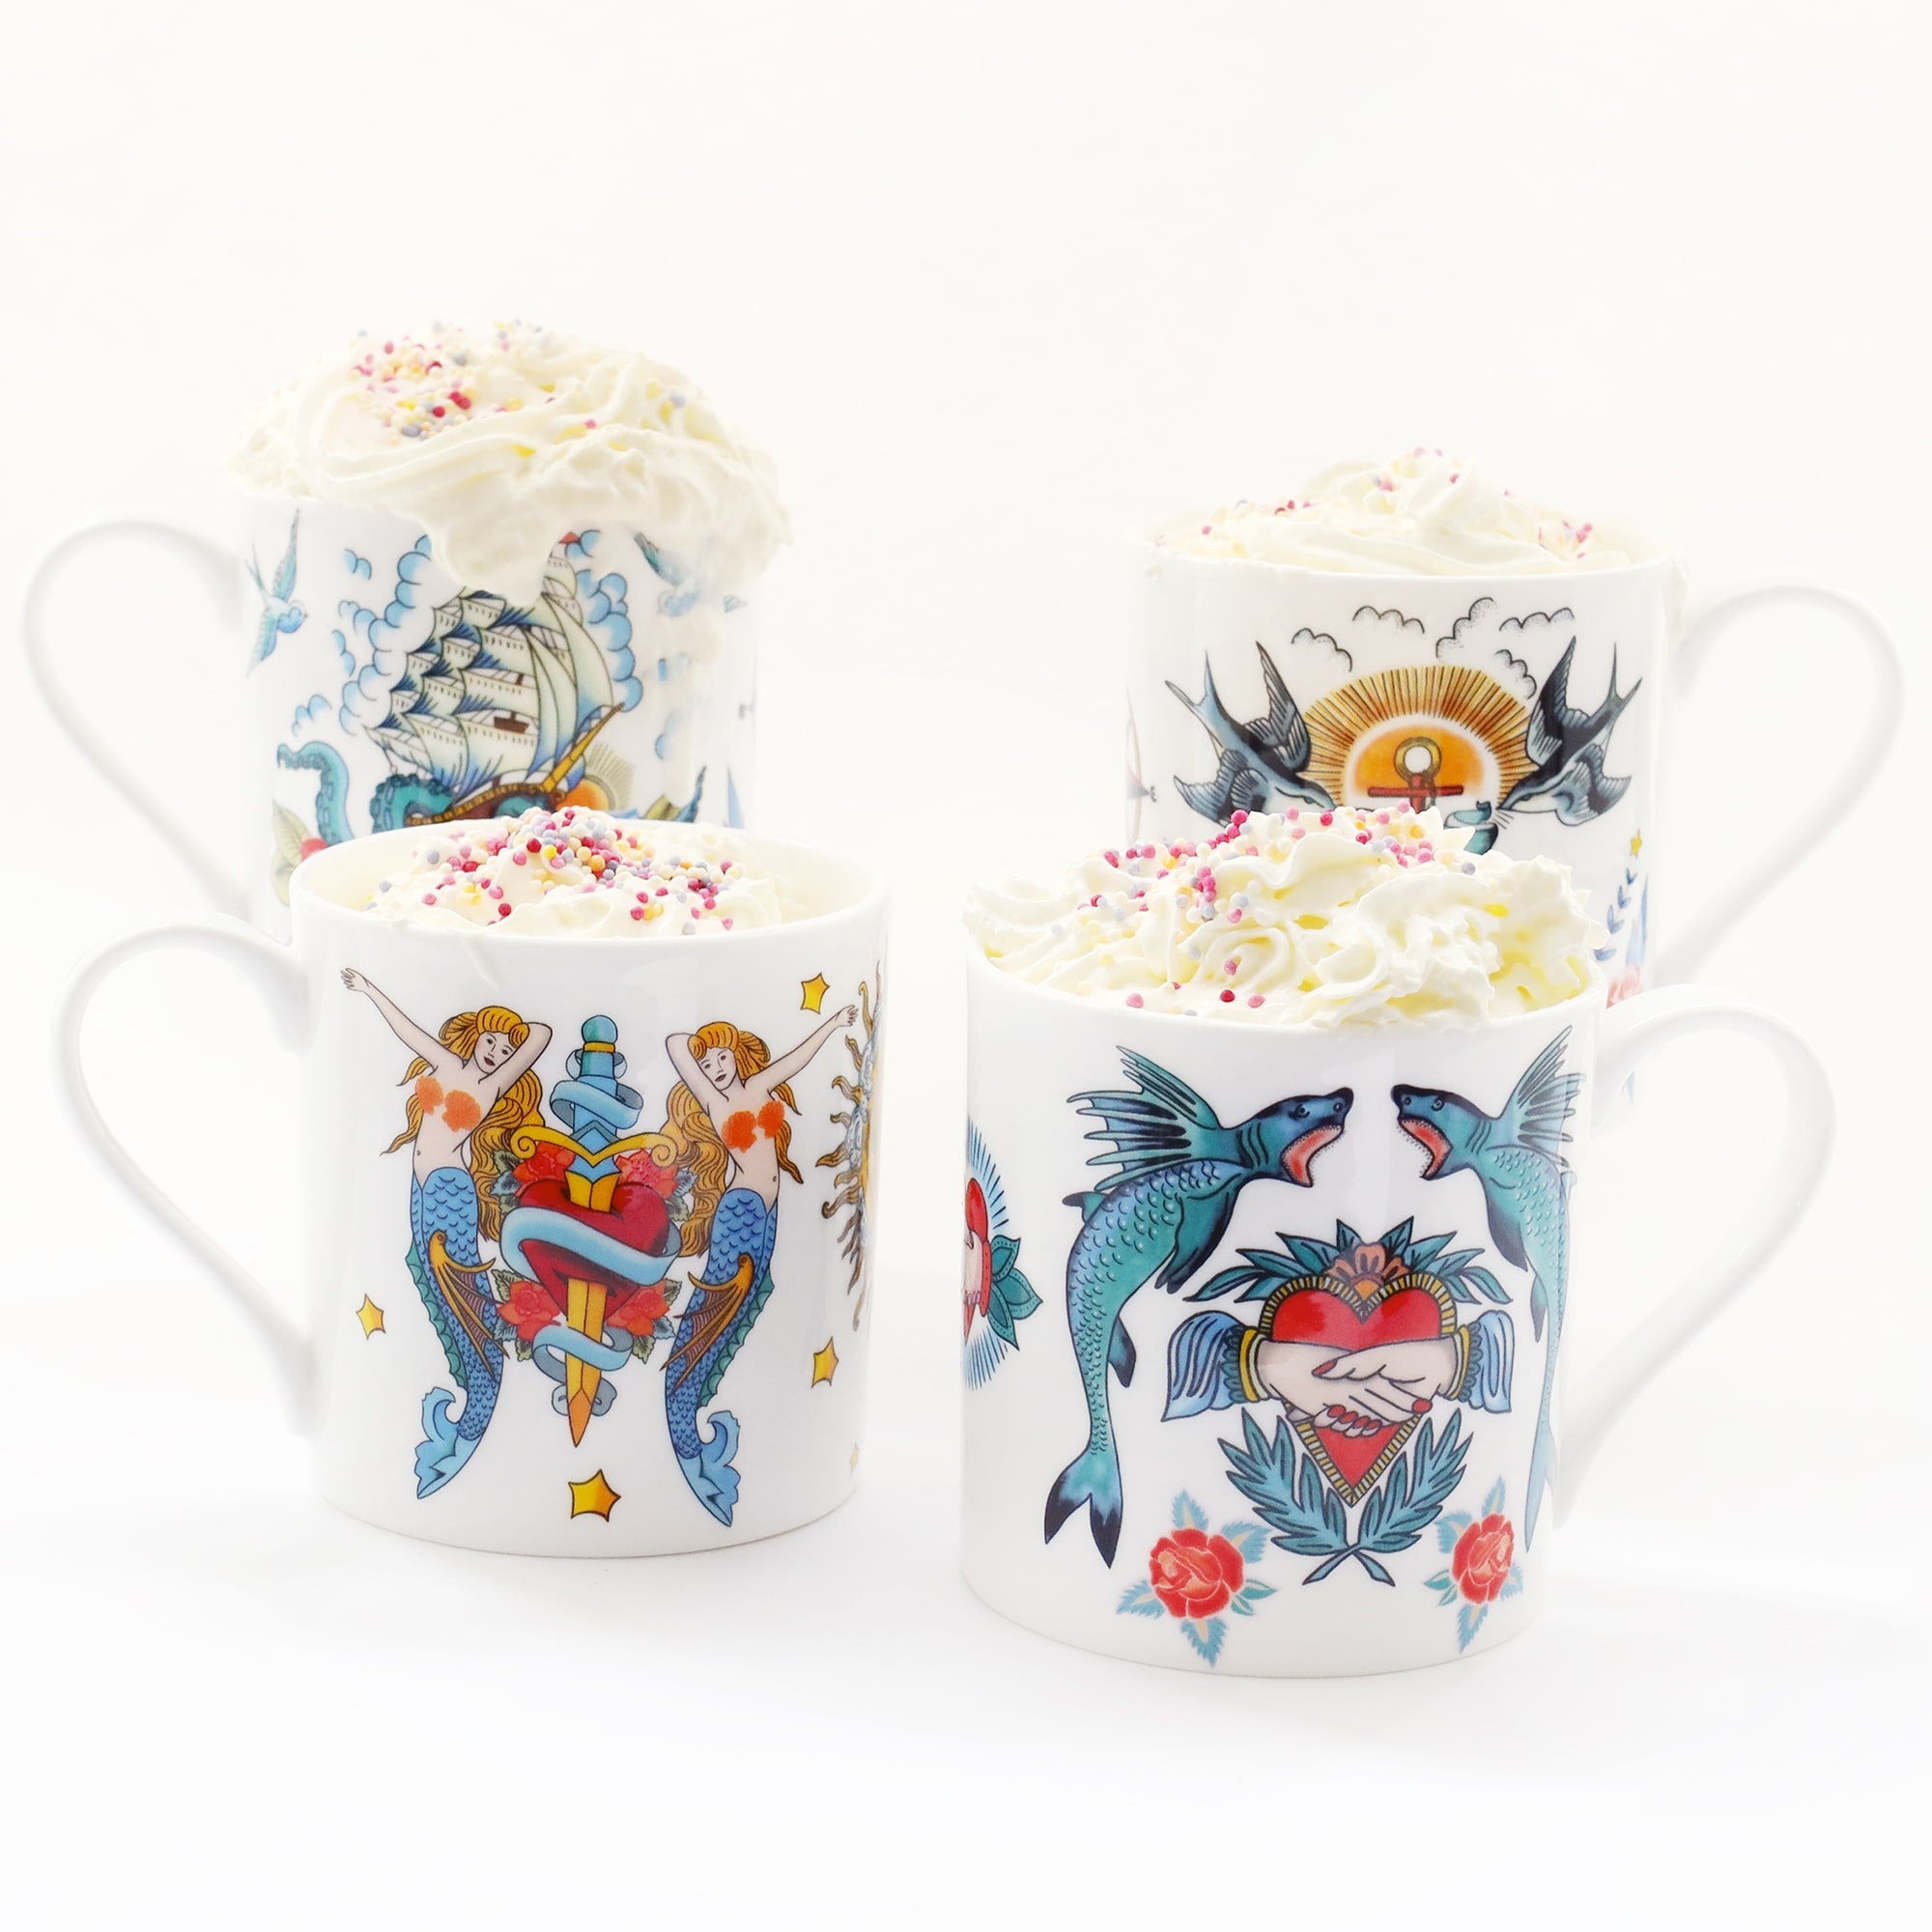 4 white mugs decorated in brightly coloured sailors tattoo's inspired designs. Each is filled with whipped cream and has hundreds and thousands sprinkled on the top.